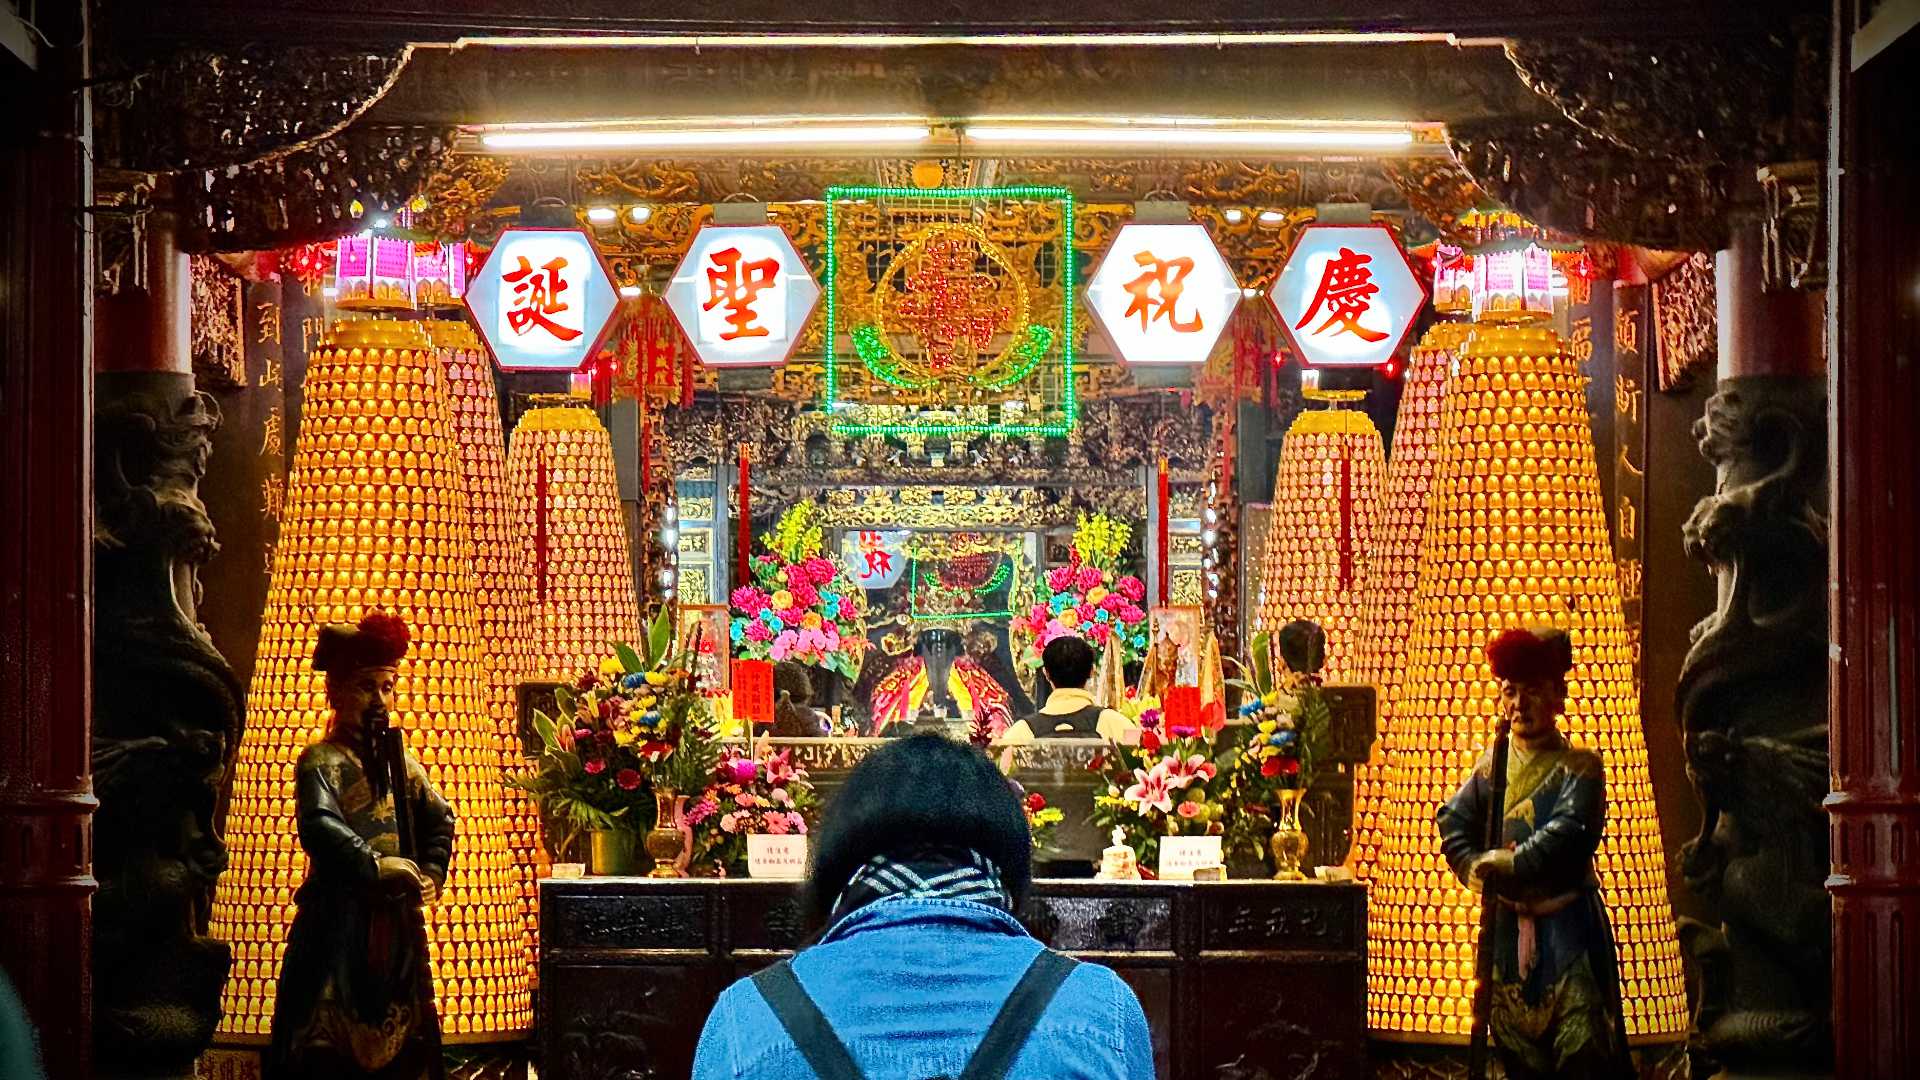 A woman praying inside Hsinchu Cheng Huang Temple. It is a richly-illuminated scene of flowers and a god on an alter, surrounded by thousands of electronic candles in a symmetrical arrangement.